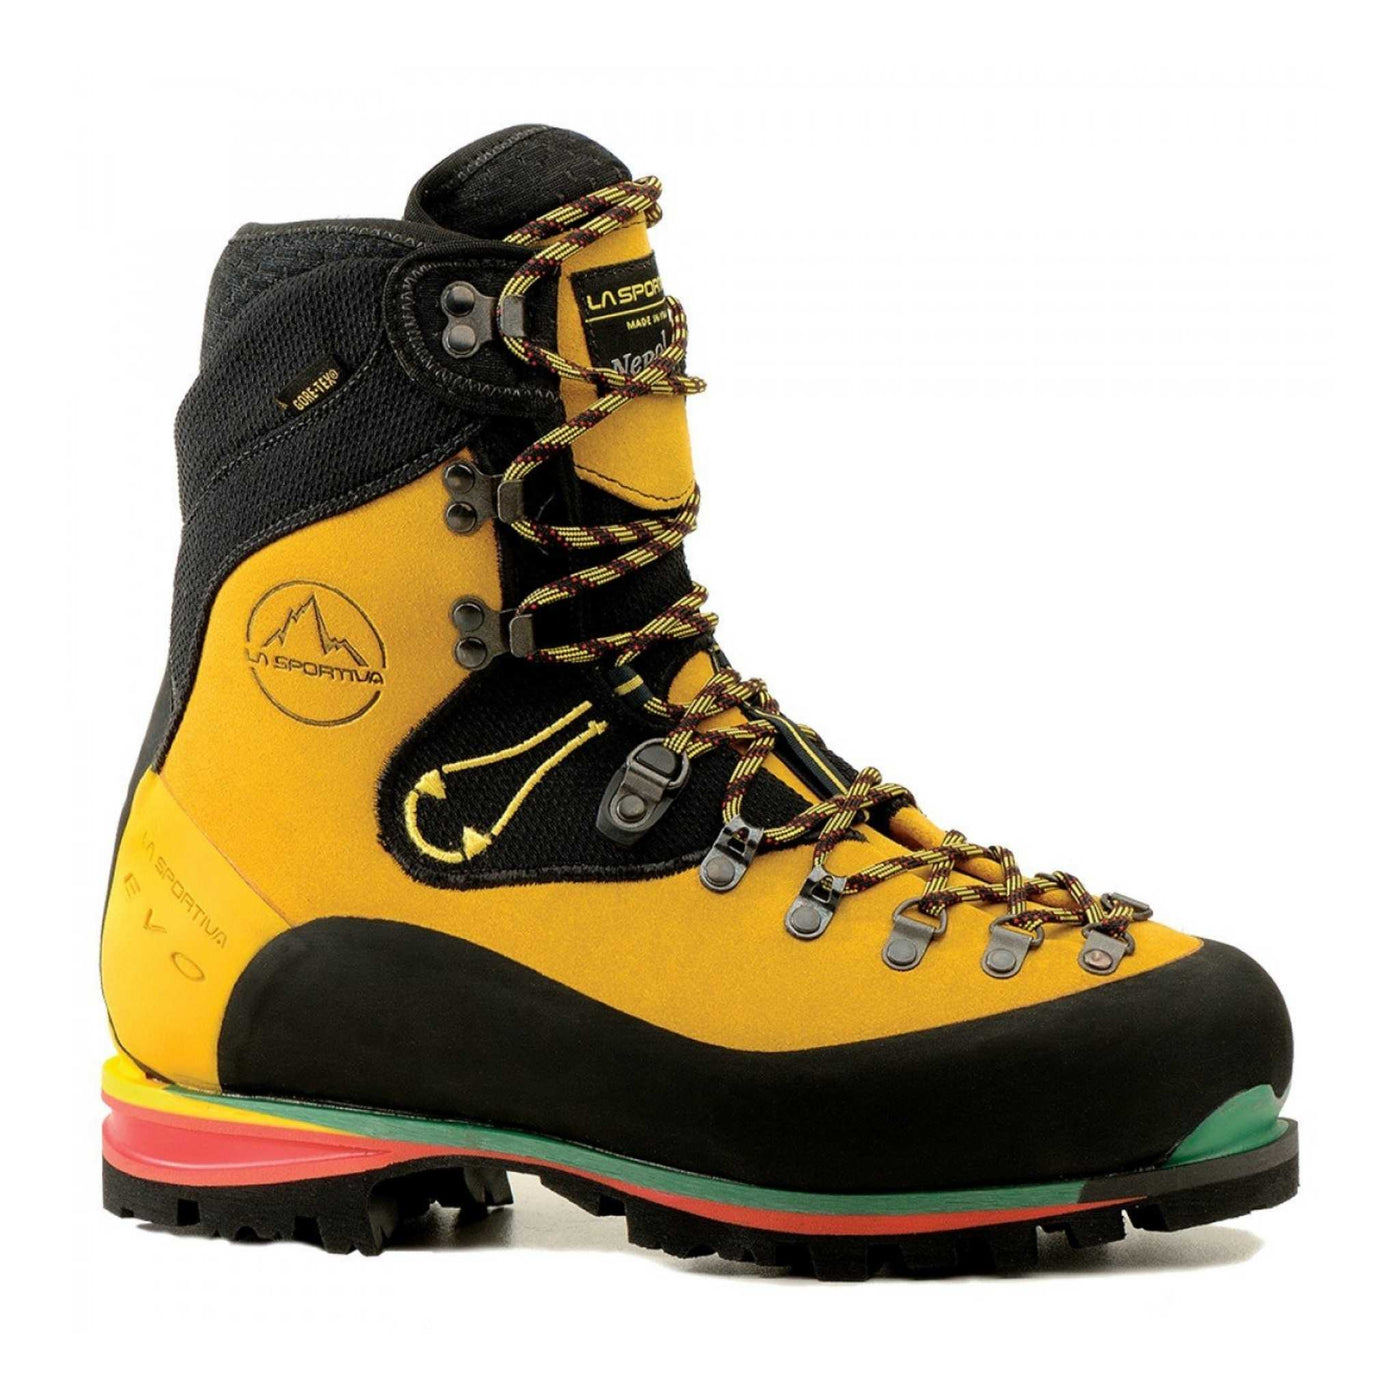 La Sportiva Nepal Evo | Mountaineering and Climbing Boot | Further Faster Christchurch NZ #yellow